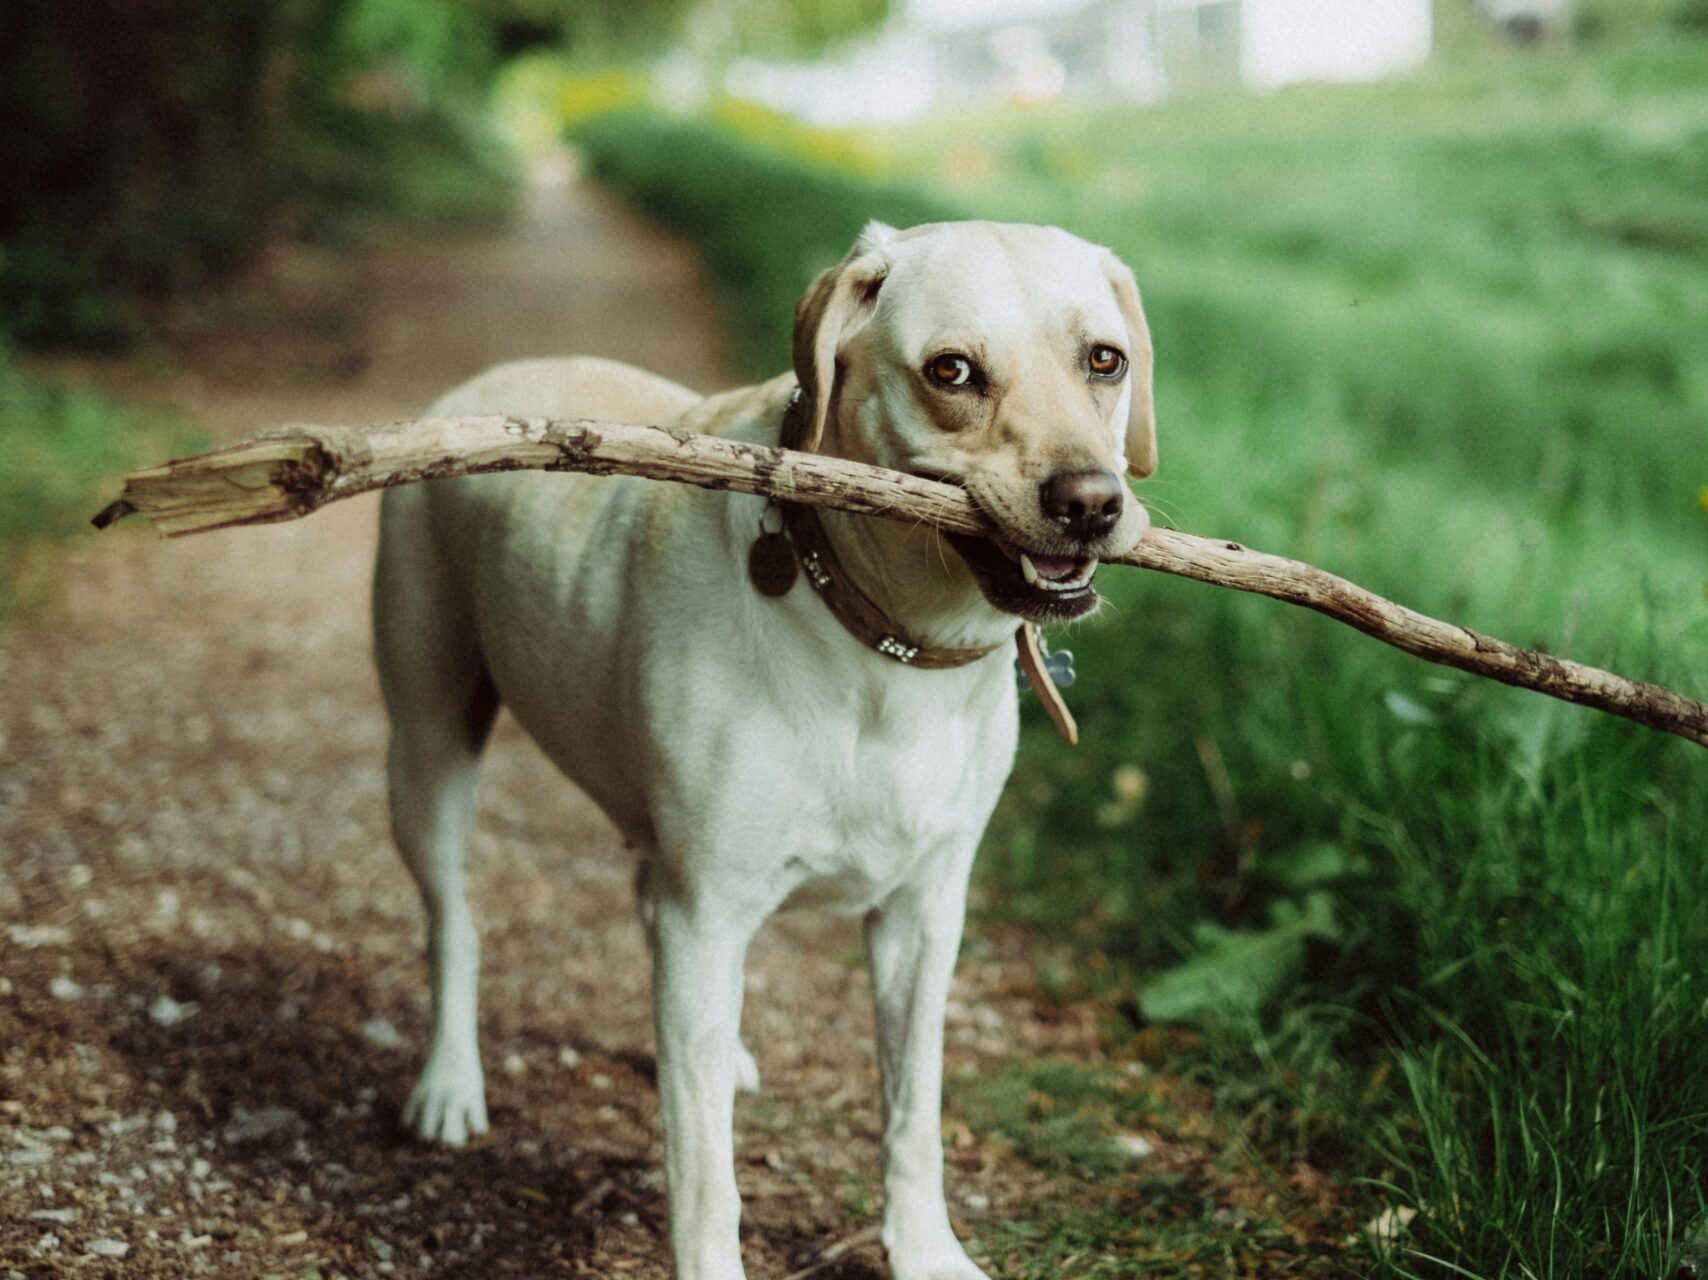 yellow lab or similar dog sanding on outdoor trail with stick in mouth